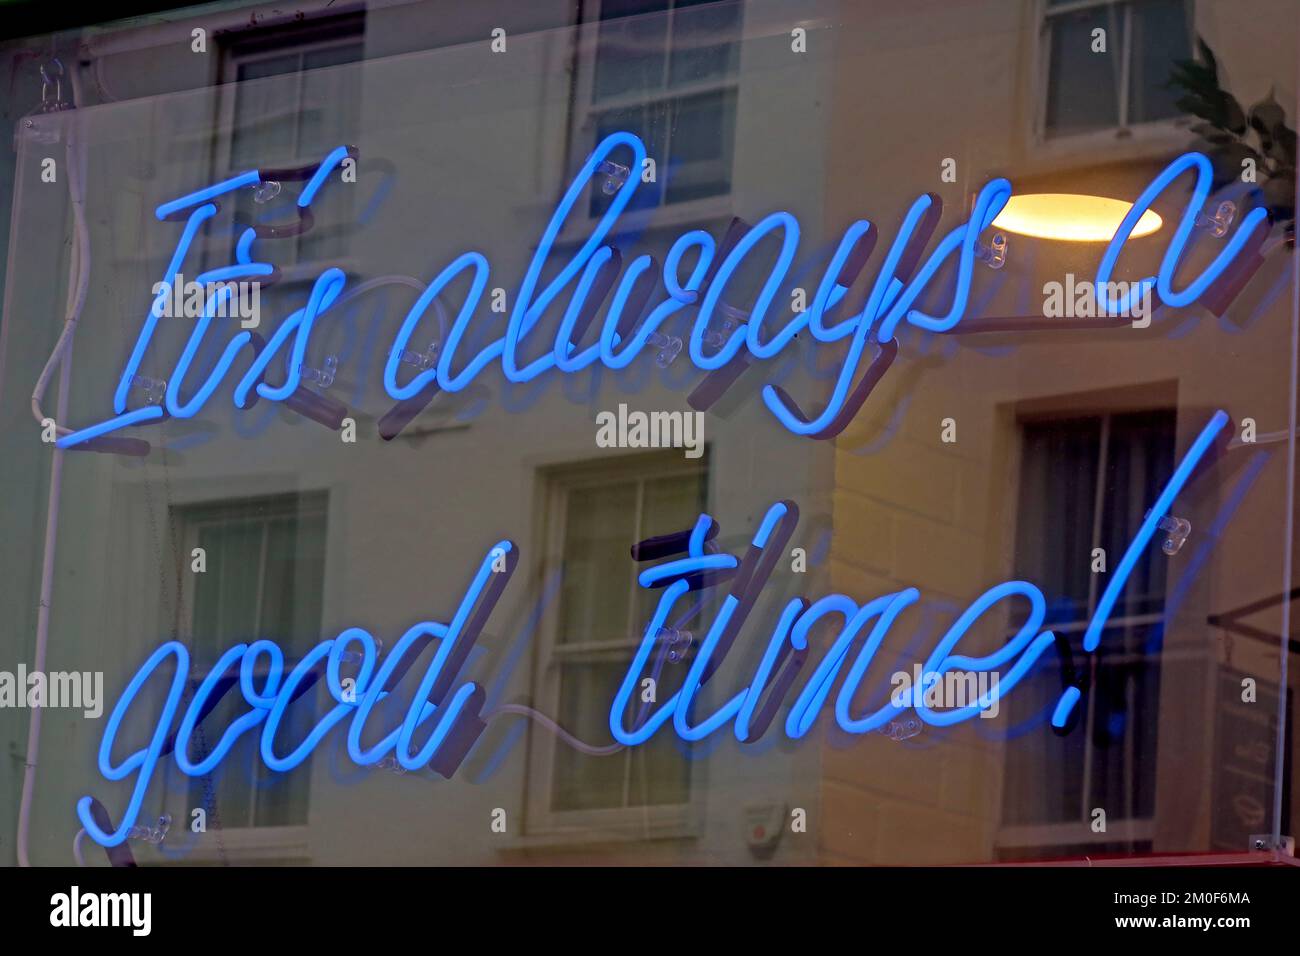 Its Always a good time, blue neon sign, London, England, UK Stock Photo